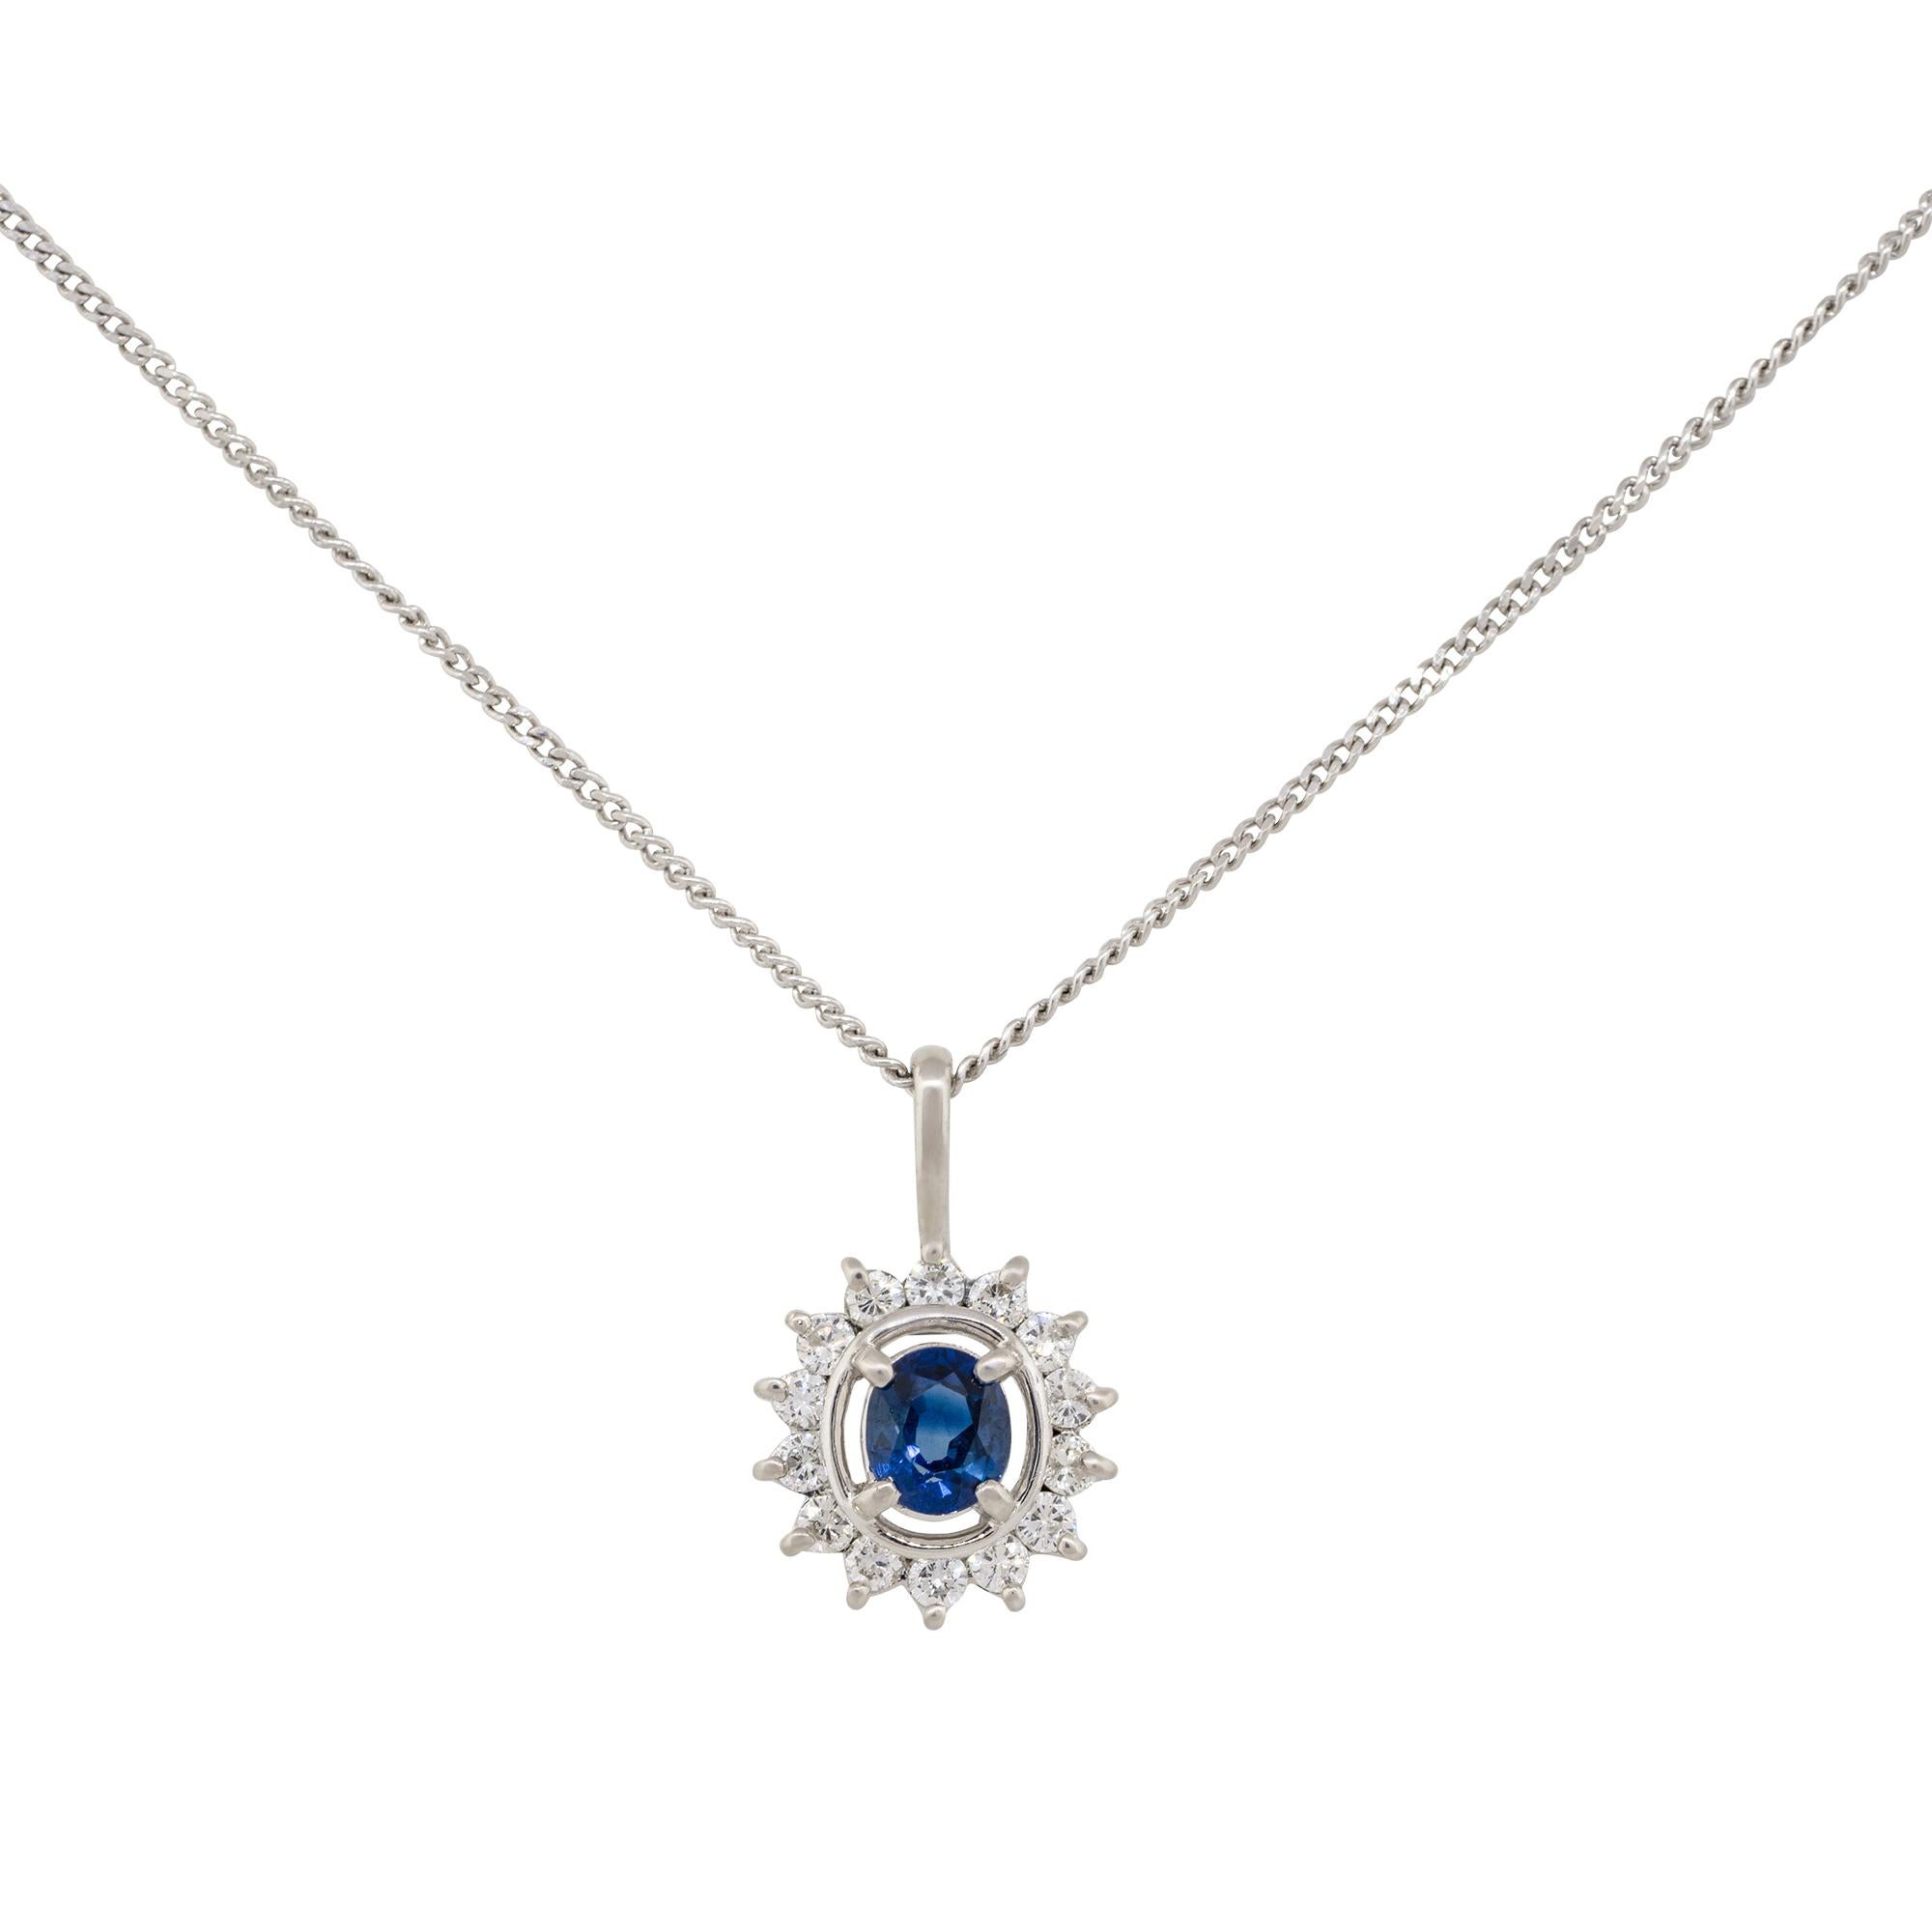 Material: Platinum
Diamond Details: Approx. 0.24ctw of round cut Diamonds. Diamonds are G/H in color and VS in clarity
Gemstone Details: Approx. 0.41ct oval cut Sapphire gemstone
Clasps: Lobster clasp
Total Weight: 3.9g (2.5dwt)  
Pendant